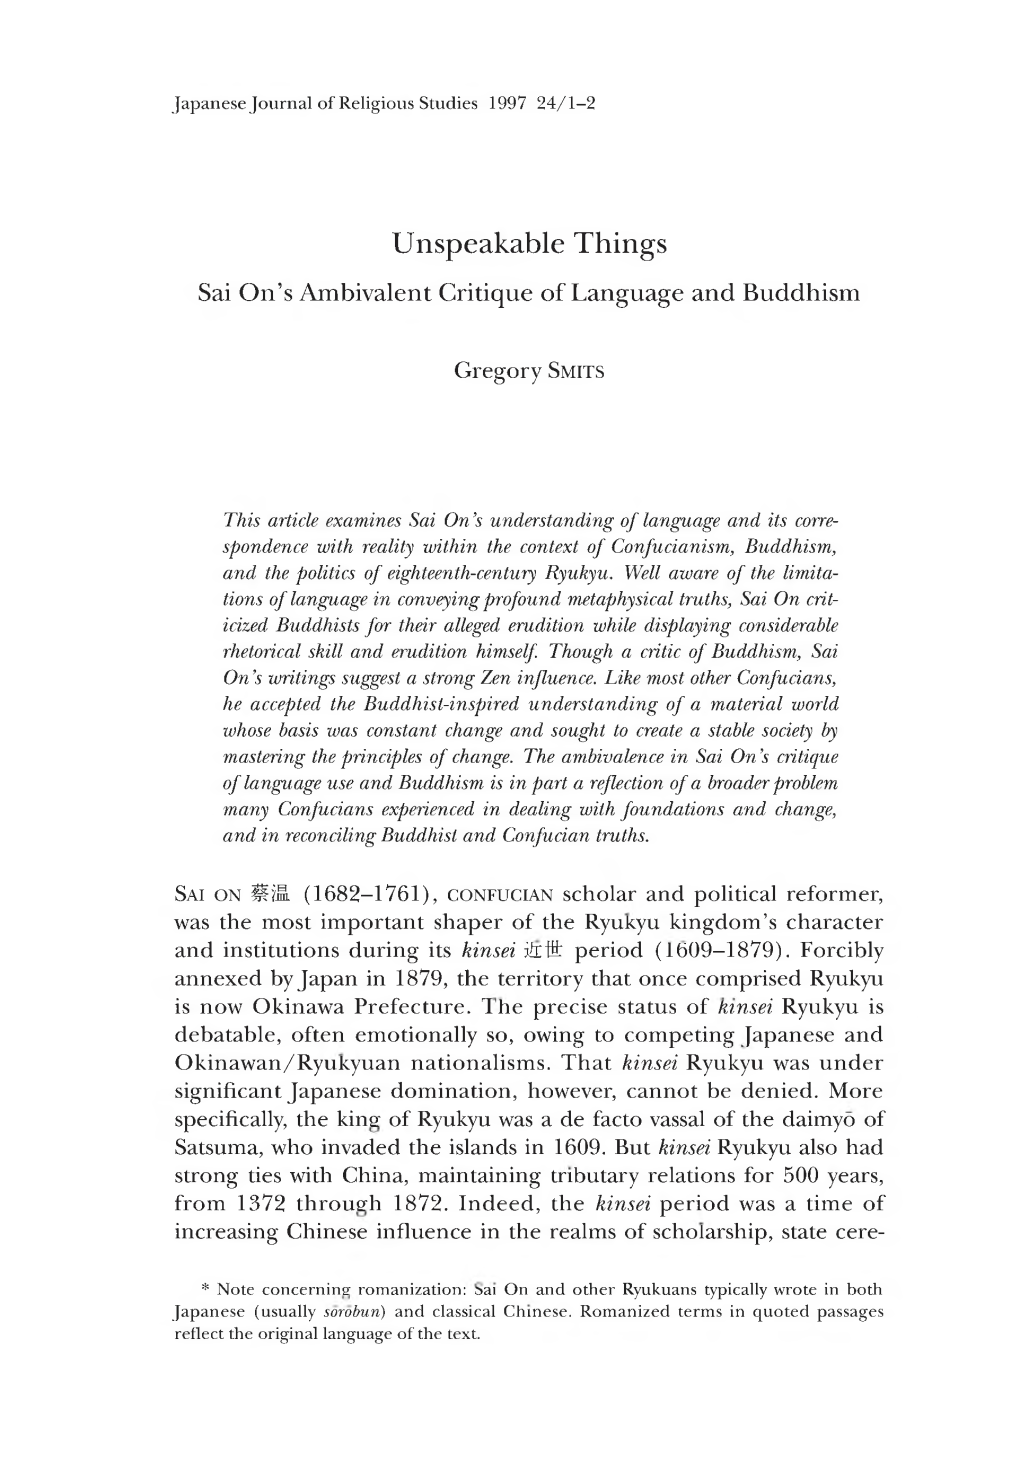 Unspeakable Things S a I O N ，S Ambivalent Critique of Language and Buddhism